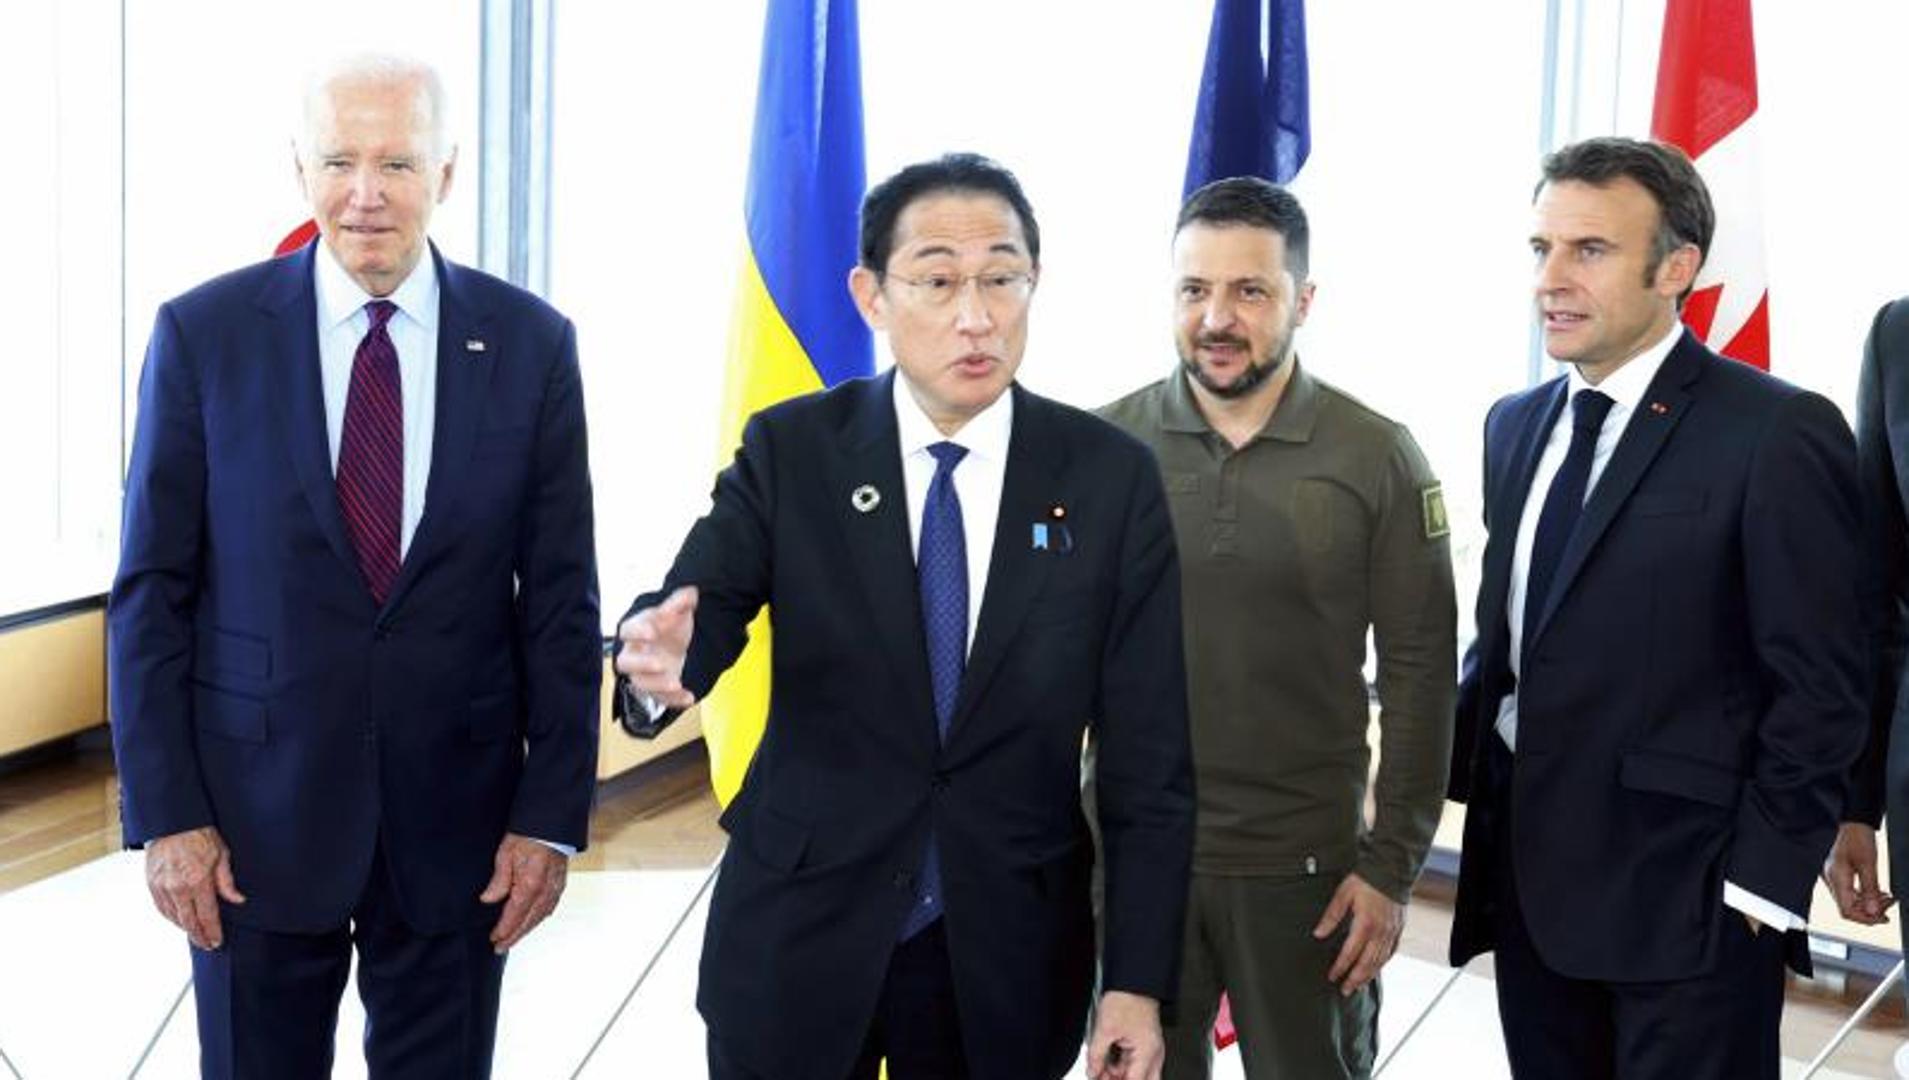 Zelensky meets with everyone in the G-7, except Lula, to press against Russia